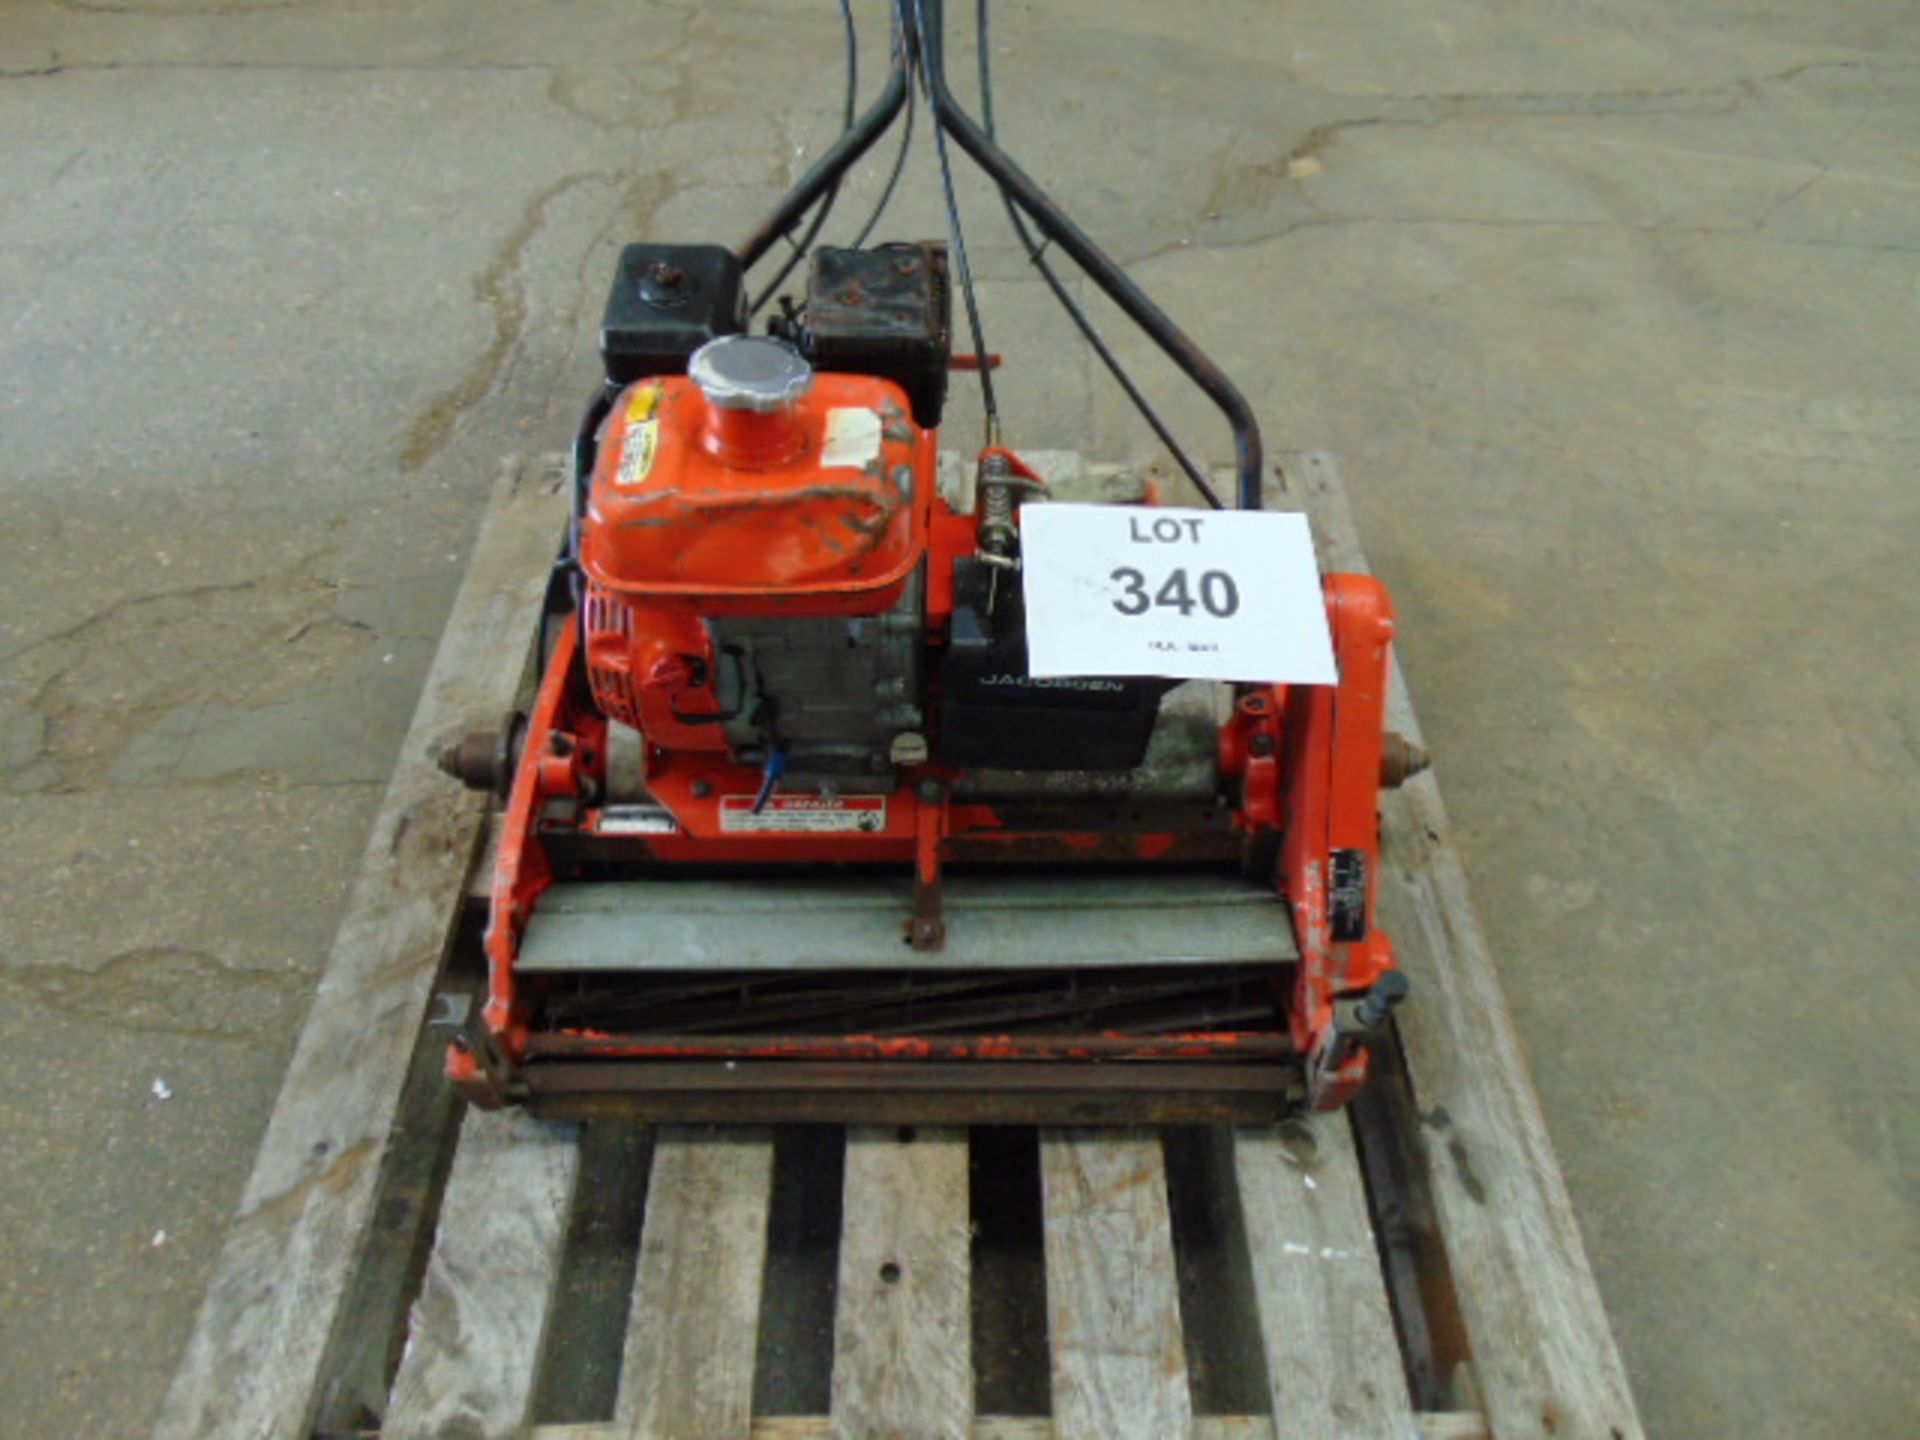 JACOBSEN 26 INCH CUT PROFFESSIONAL CYLINDER MOWER WITH 4 HP GX 120 ENGINE - Image 3 of 8